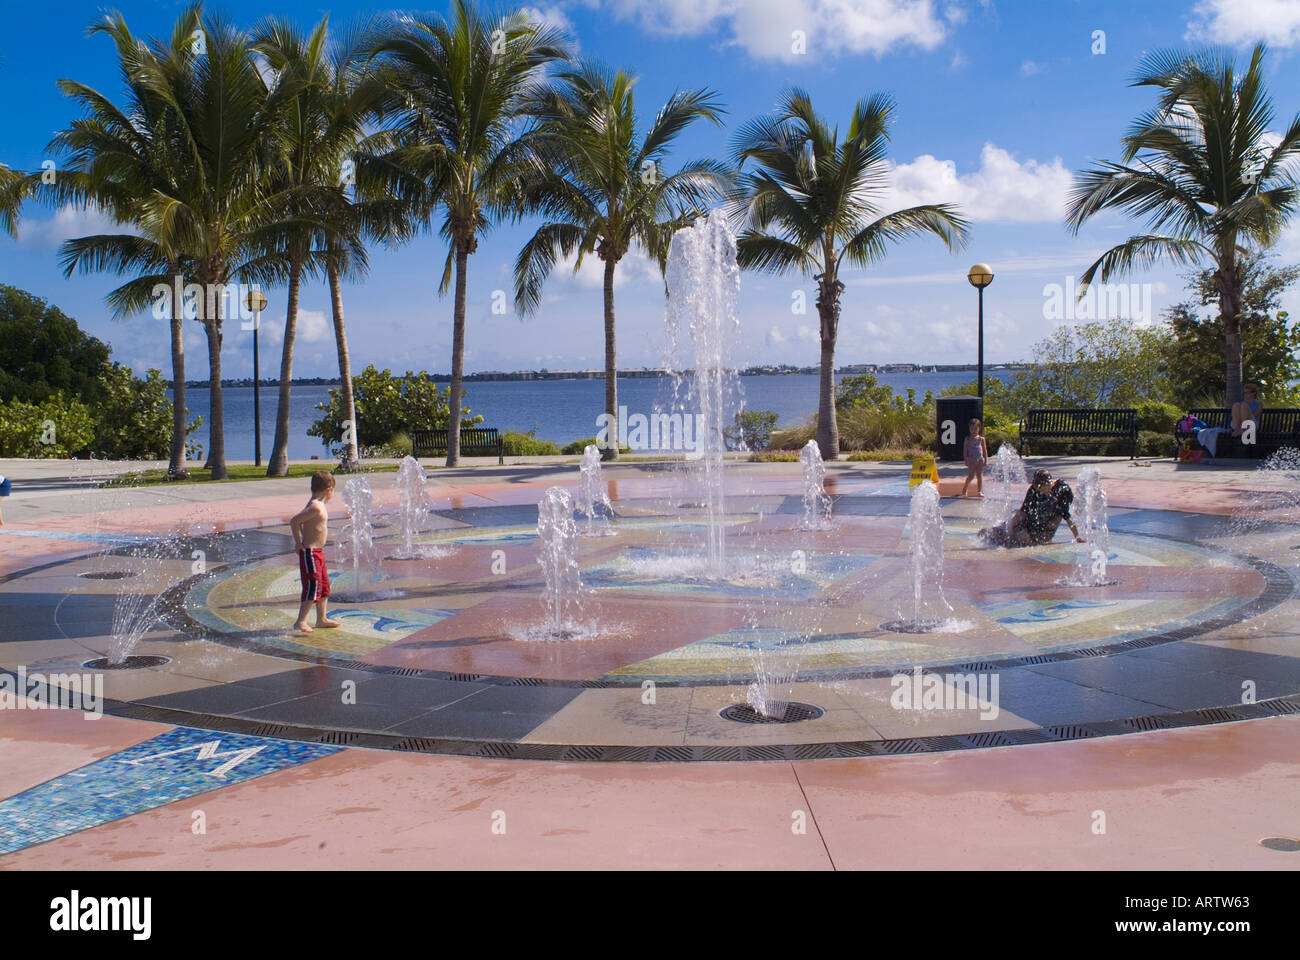 children playing in water fountain at a Florida park cooling off recreation fountains palm trees Stock Photo